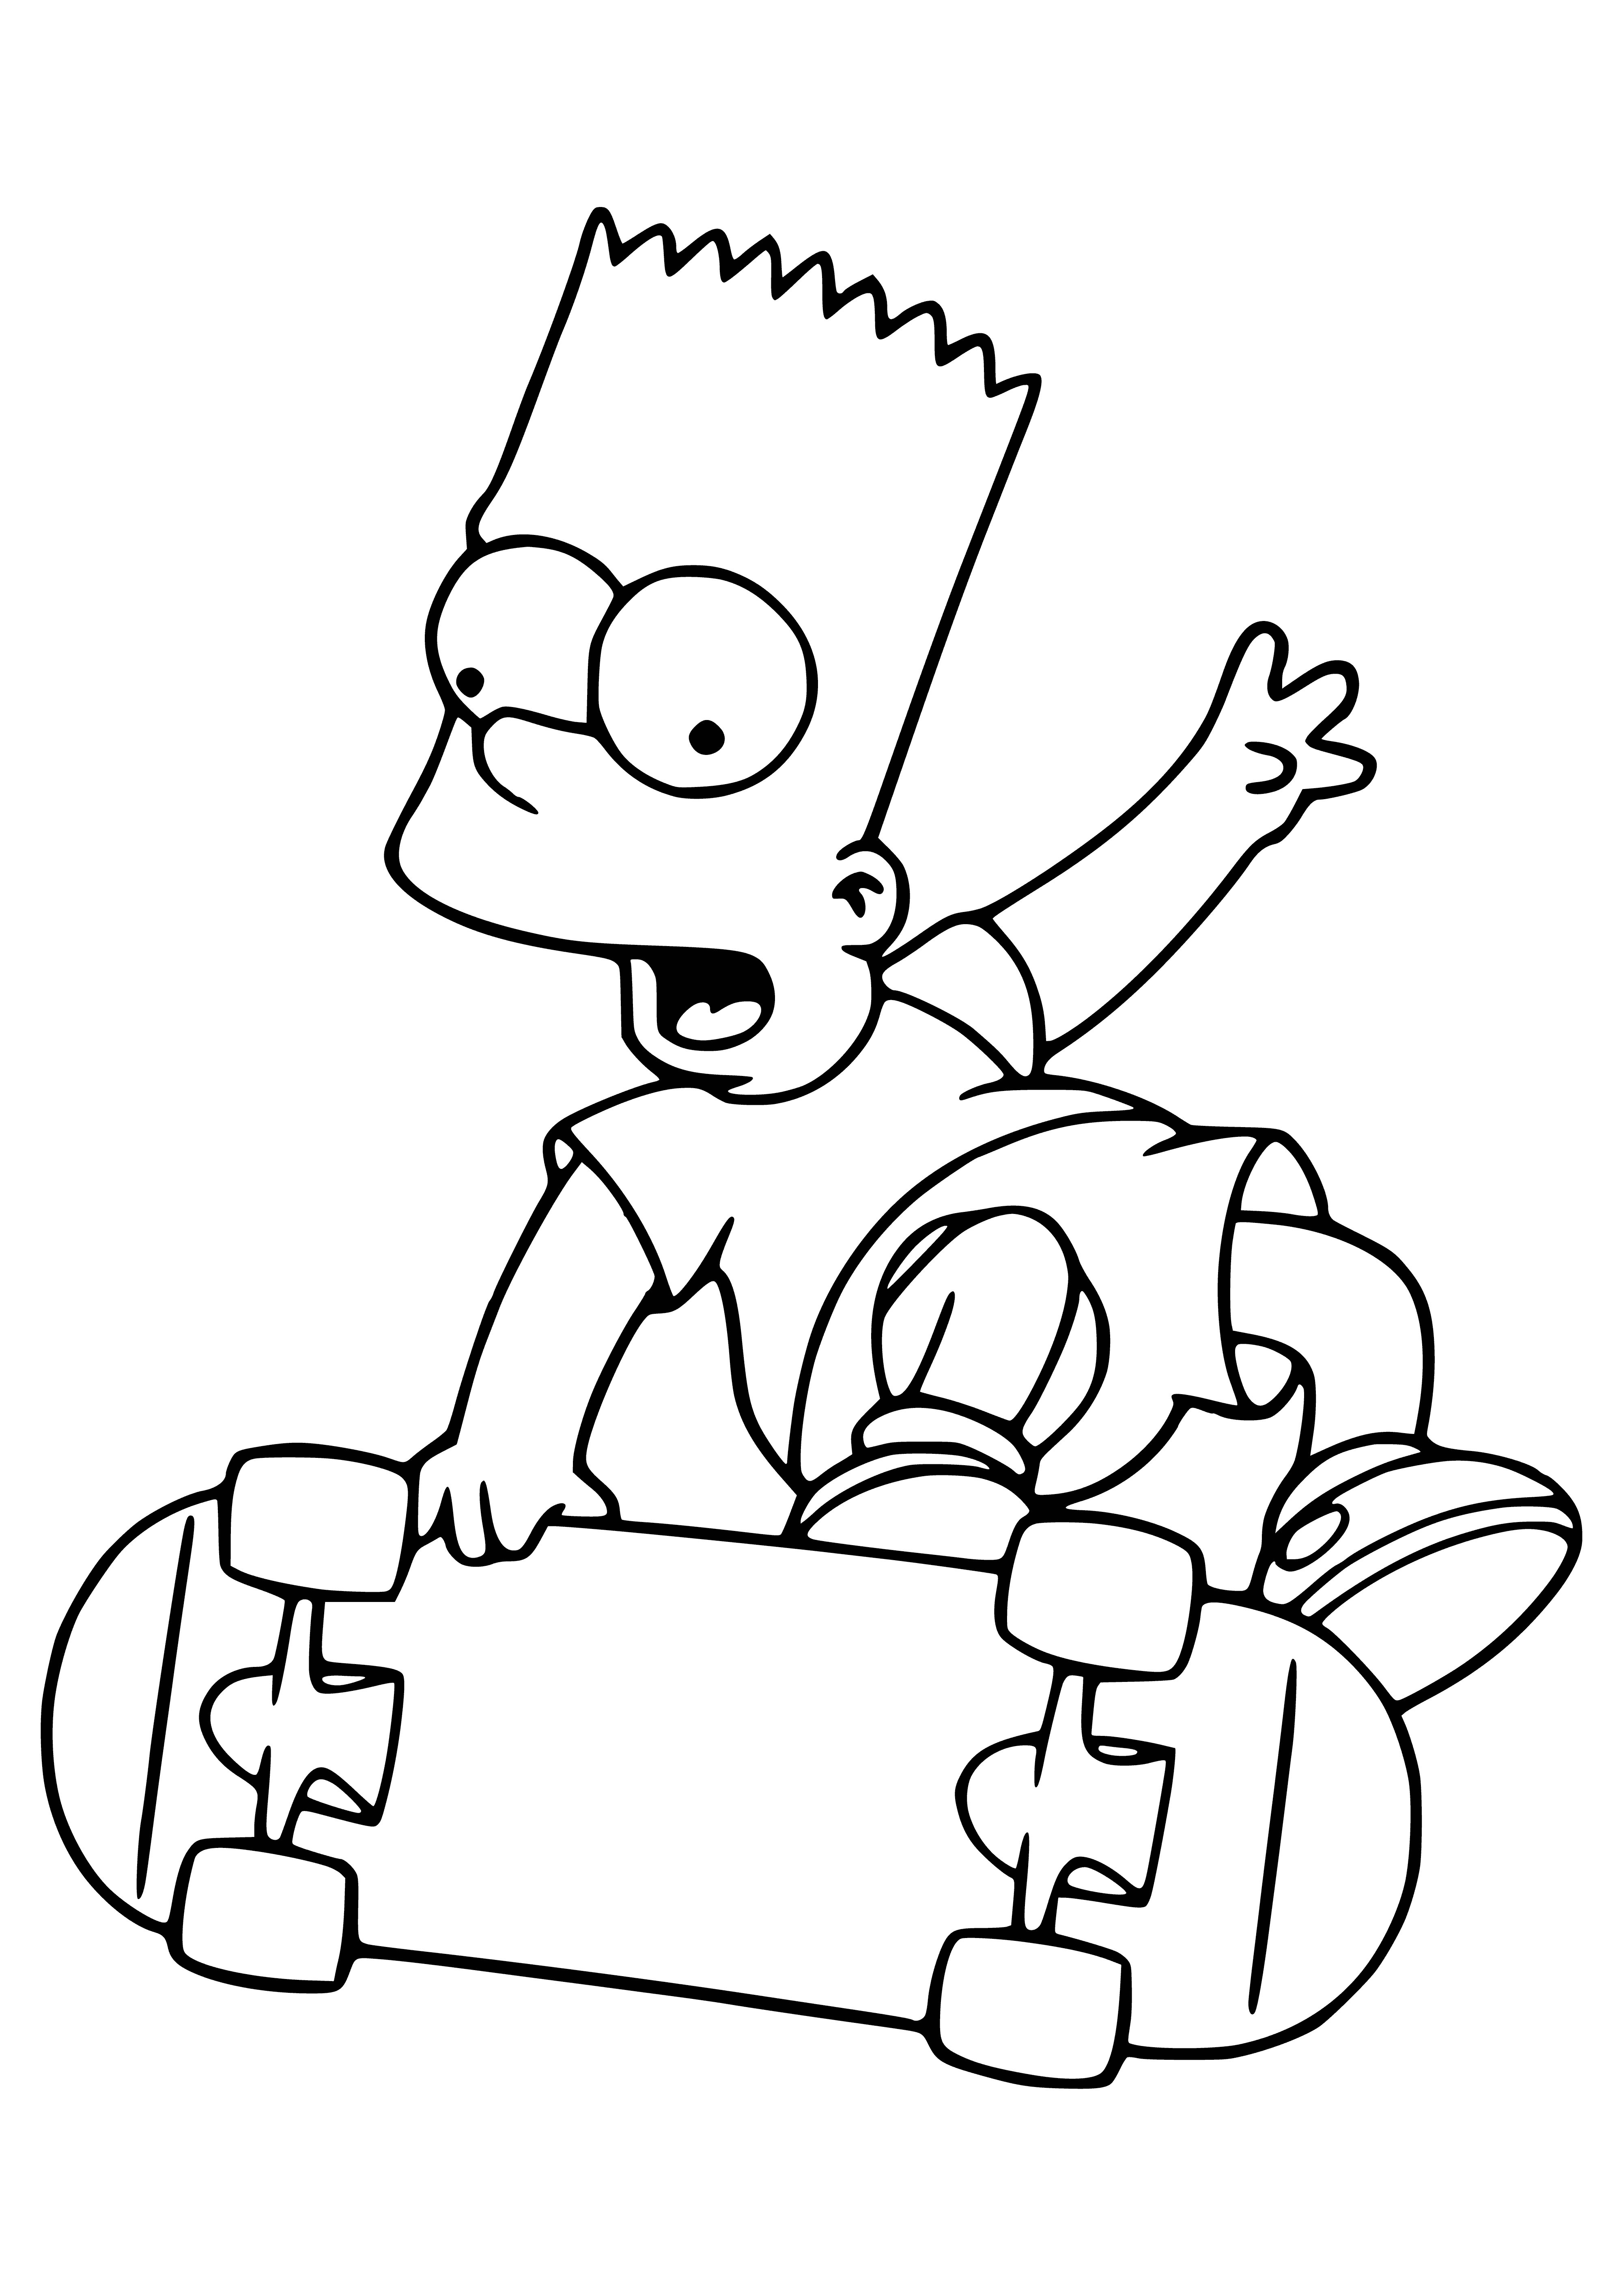 coloring page: Boy skateboarding down road wearing blue shirt and red shorts; yellow hair and black skateboard w/ yellow wheels.